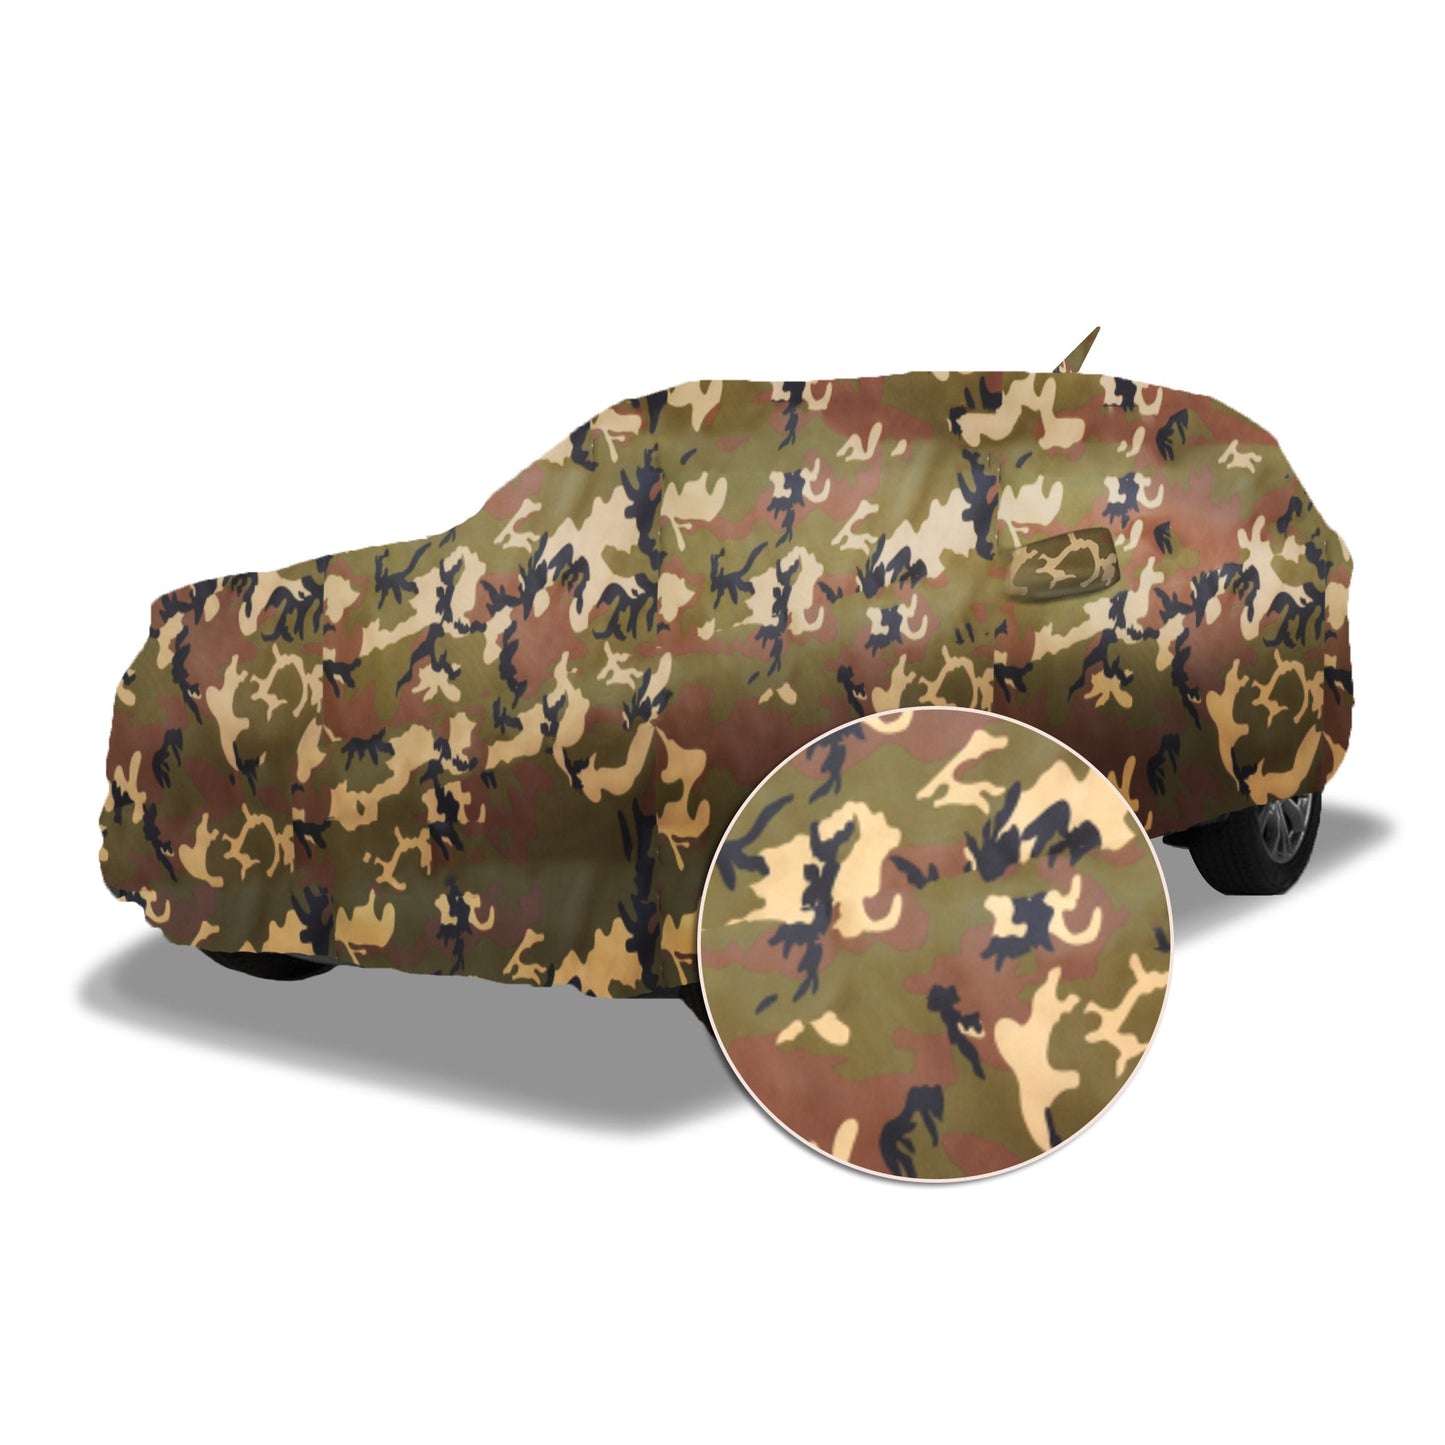 Ascot Maruti Suzuki Wagonr 1999-2009 Model Car Body Cover Extra Strong & Dust Proof Jungle Military Car Cover with UV Proof & Water-Resistant Coating